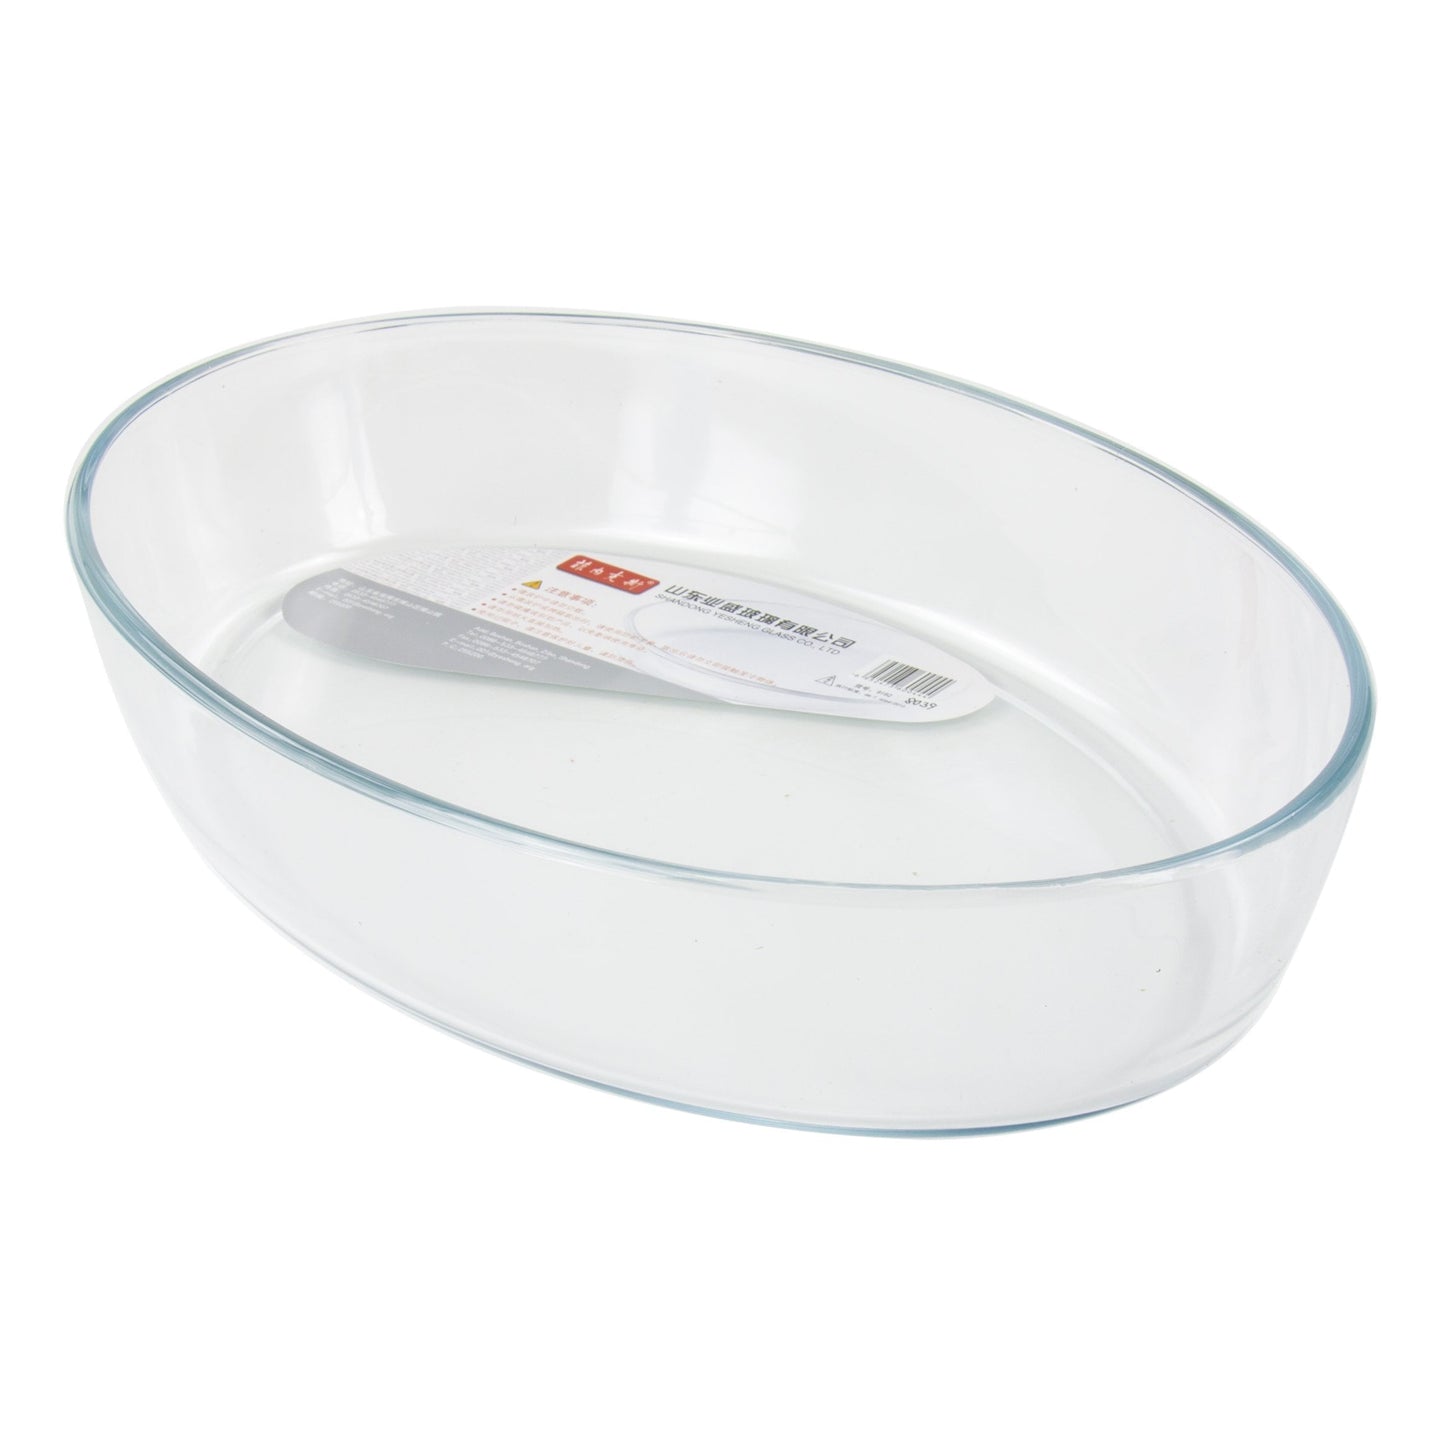 Glassware Roaster Tempered Oval Baking Cooking Tray Dish 3 Litre 35 x 24 x 6.5cm 8039 (Parcel Rate)